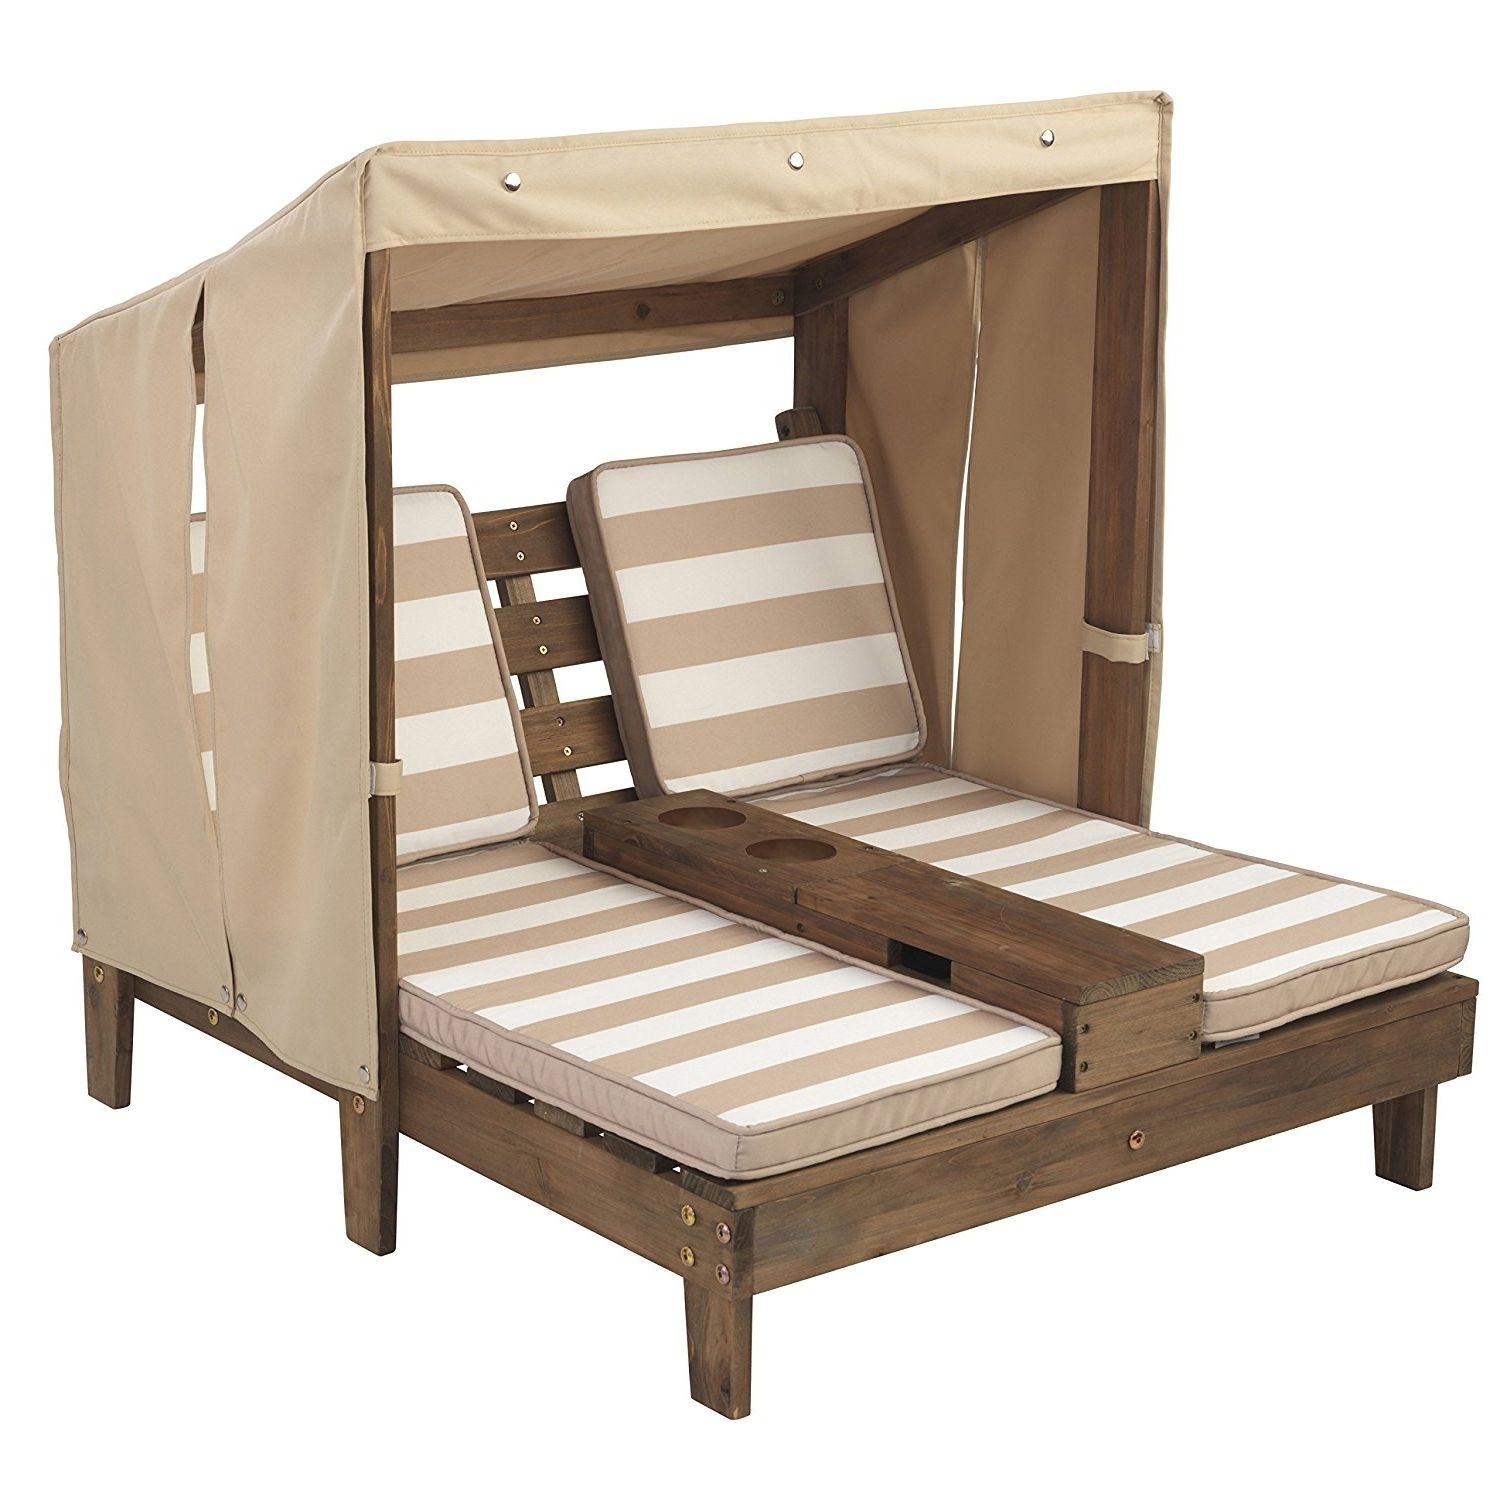 Current Kidkraft Double Chaise Lounges Pertaining To Amazon: Kidkraft Double Chaise Lounge With Cup Holders: Toys (View 13 of 15)